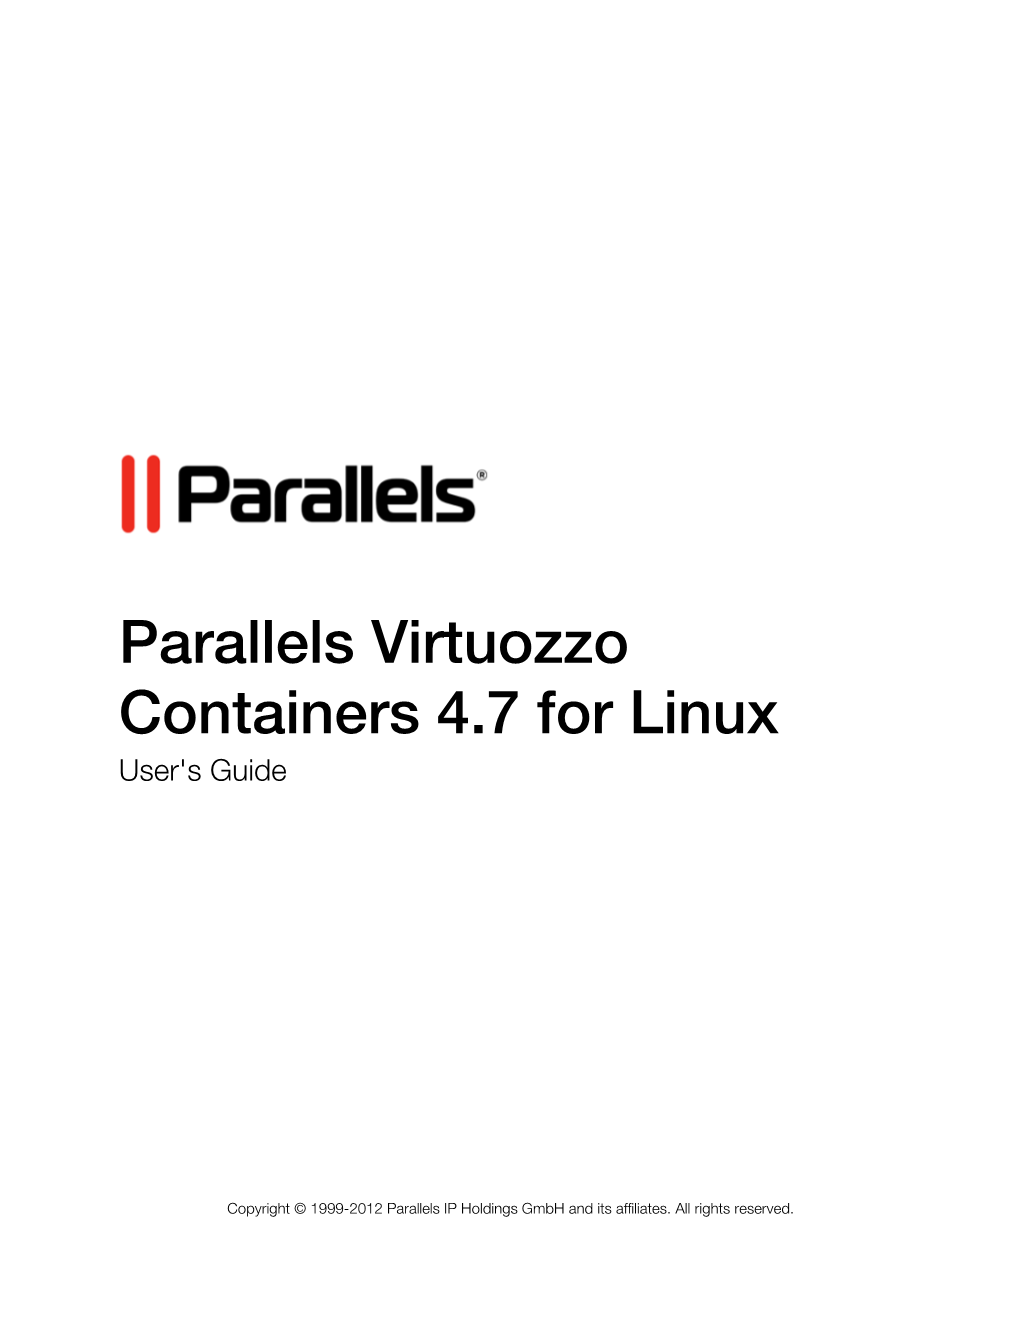 Parallels Virtuozzo Containers 4.7 for Linux User's Guide